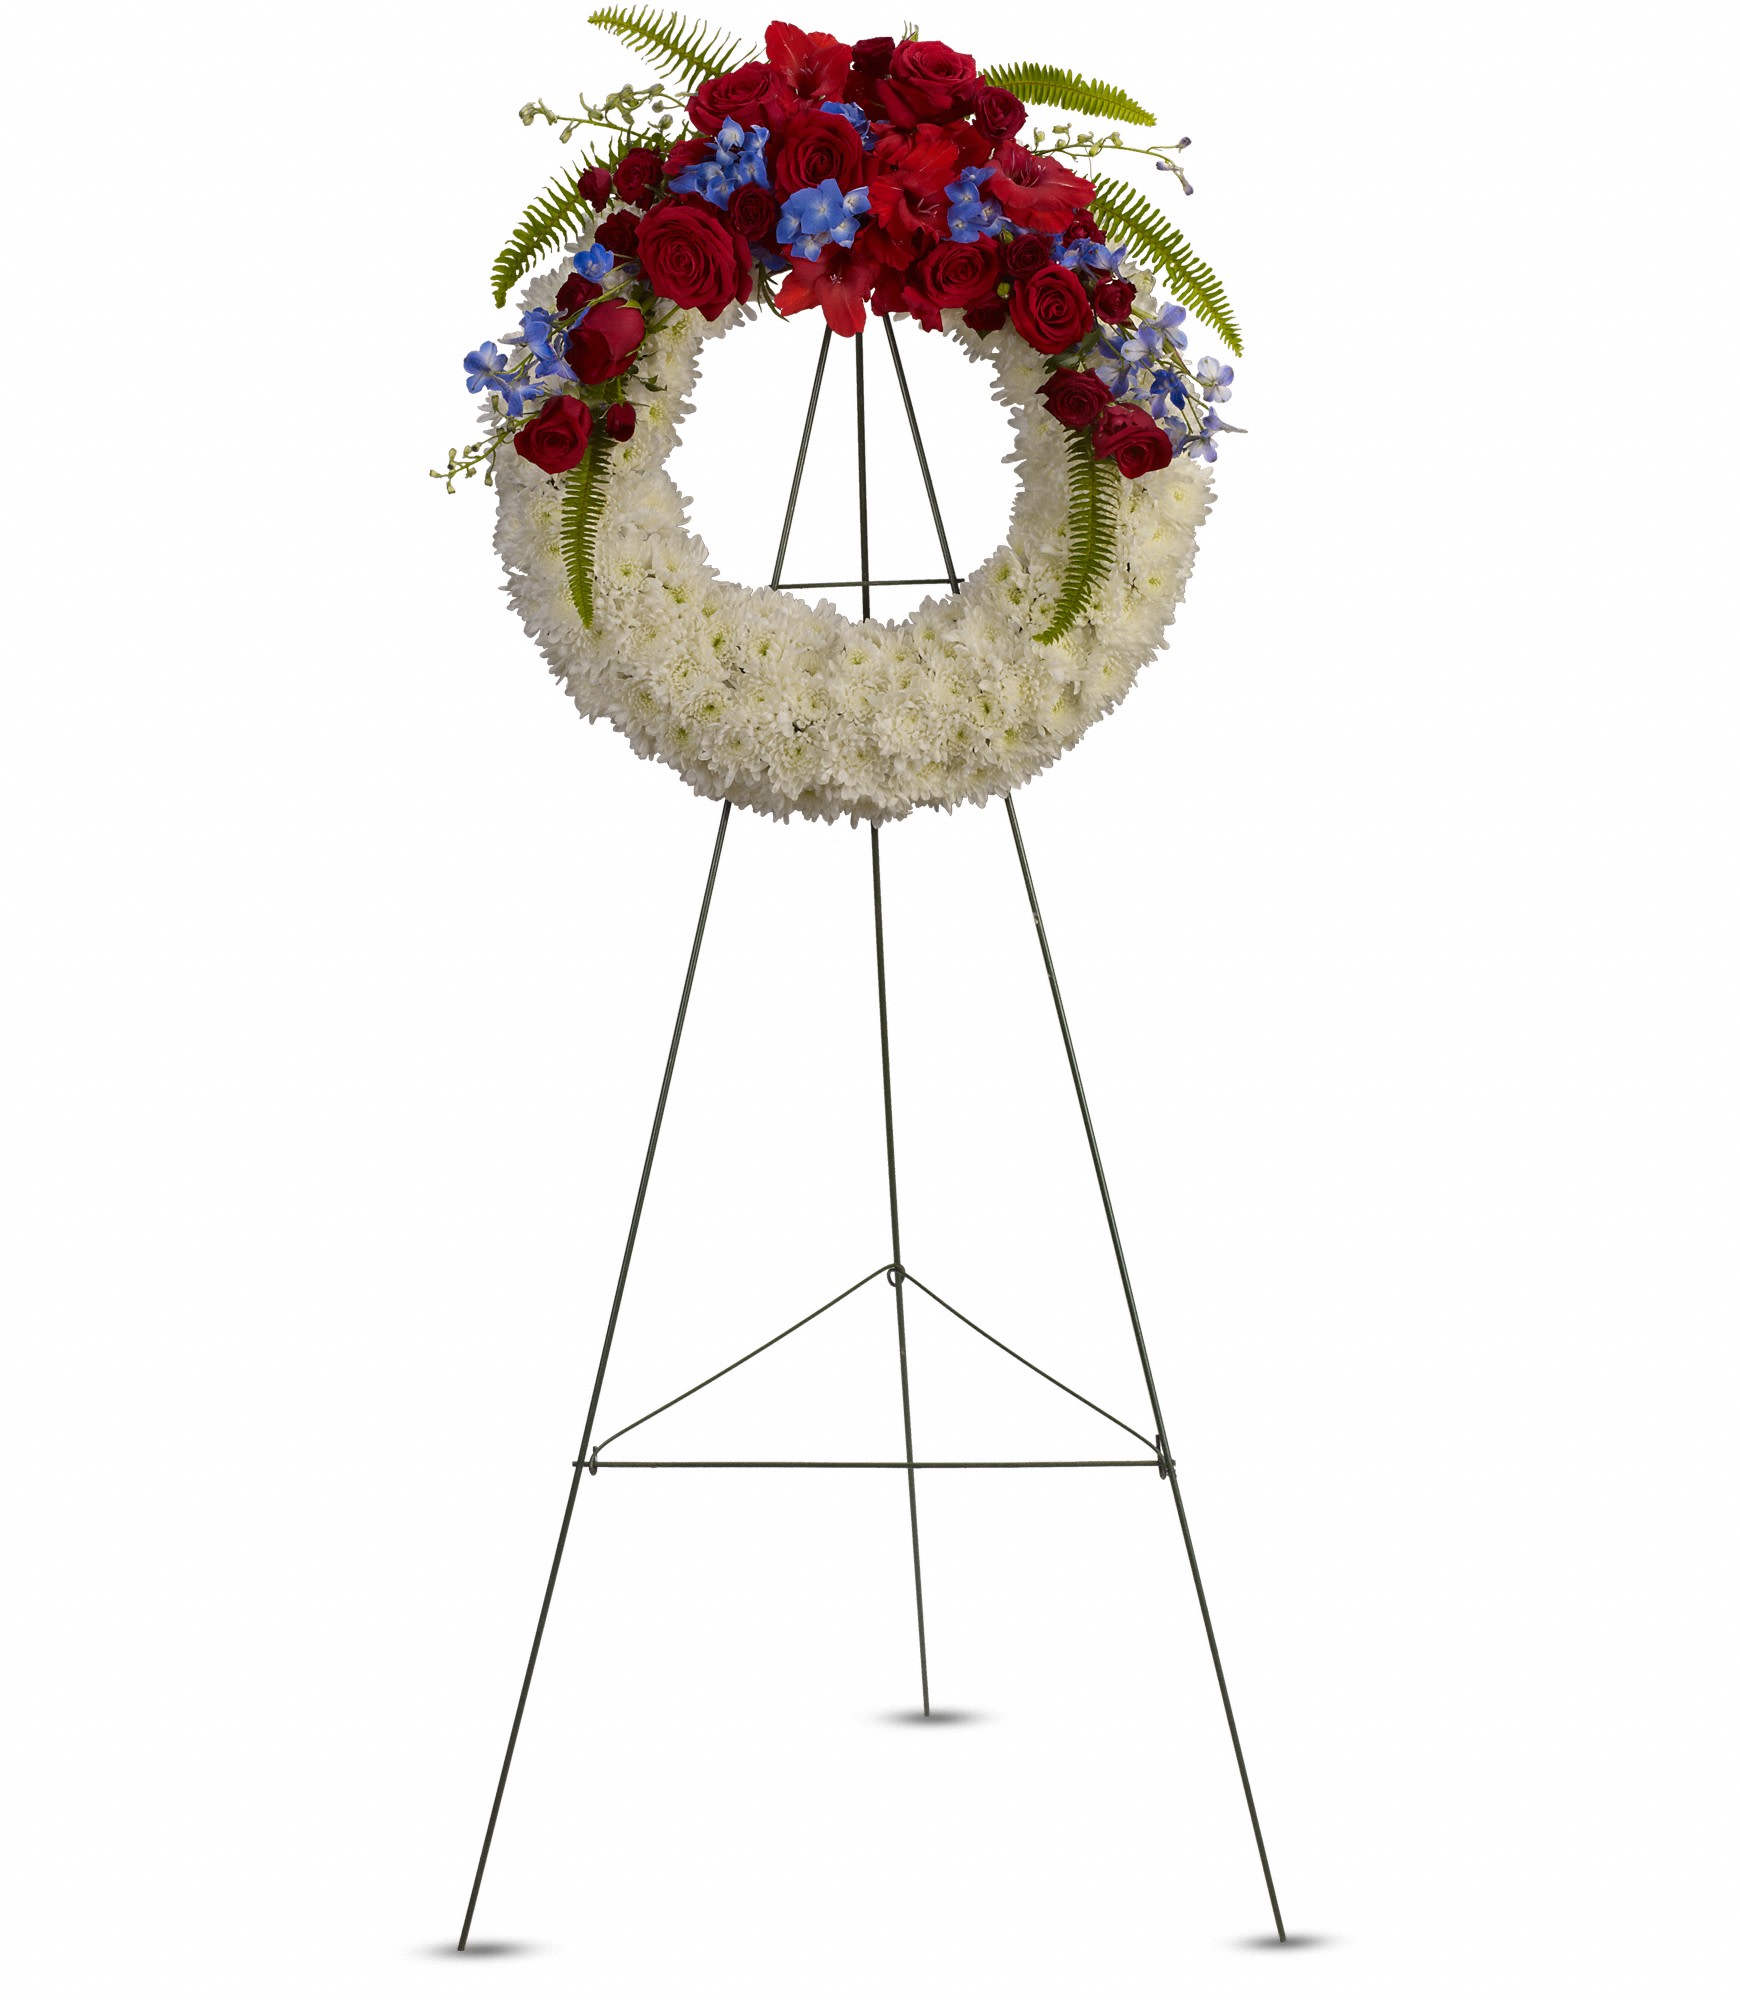 Reflections of Glory Wreath  - A stunning display of patriotism, strength and sympathy. This red, white and blue wreath delivers a lovely message about the dignity of the deceased. 